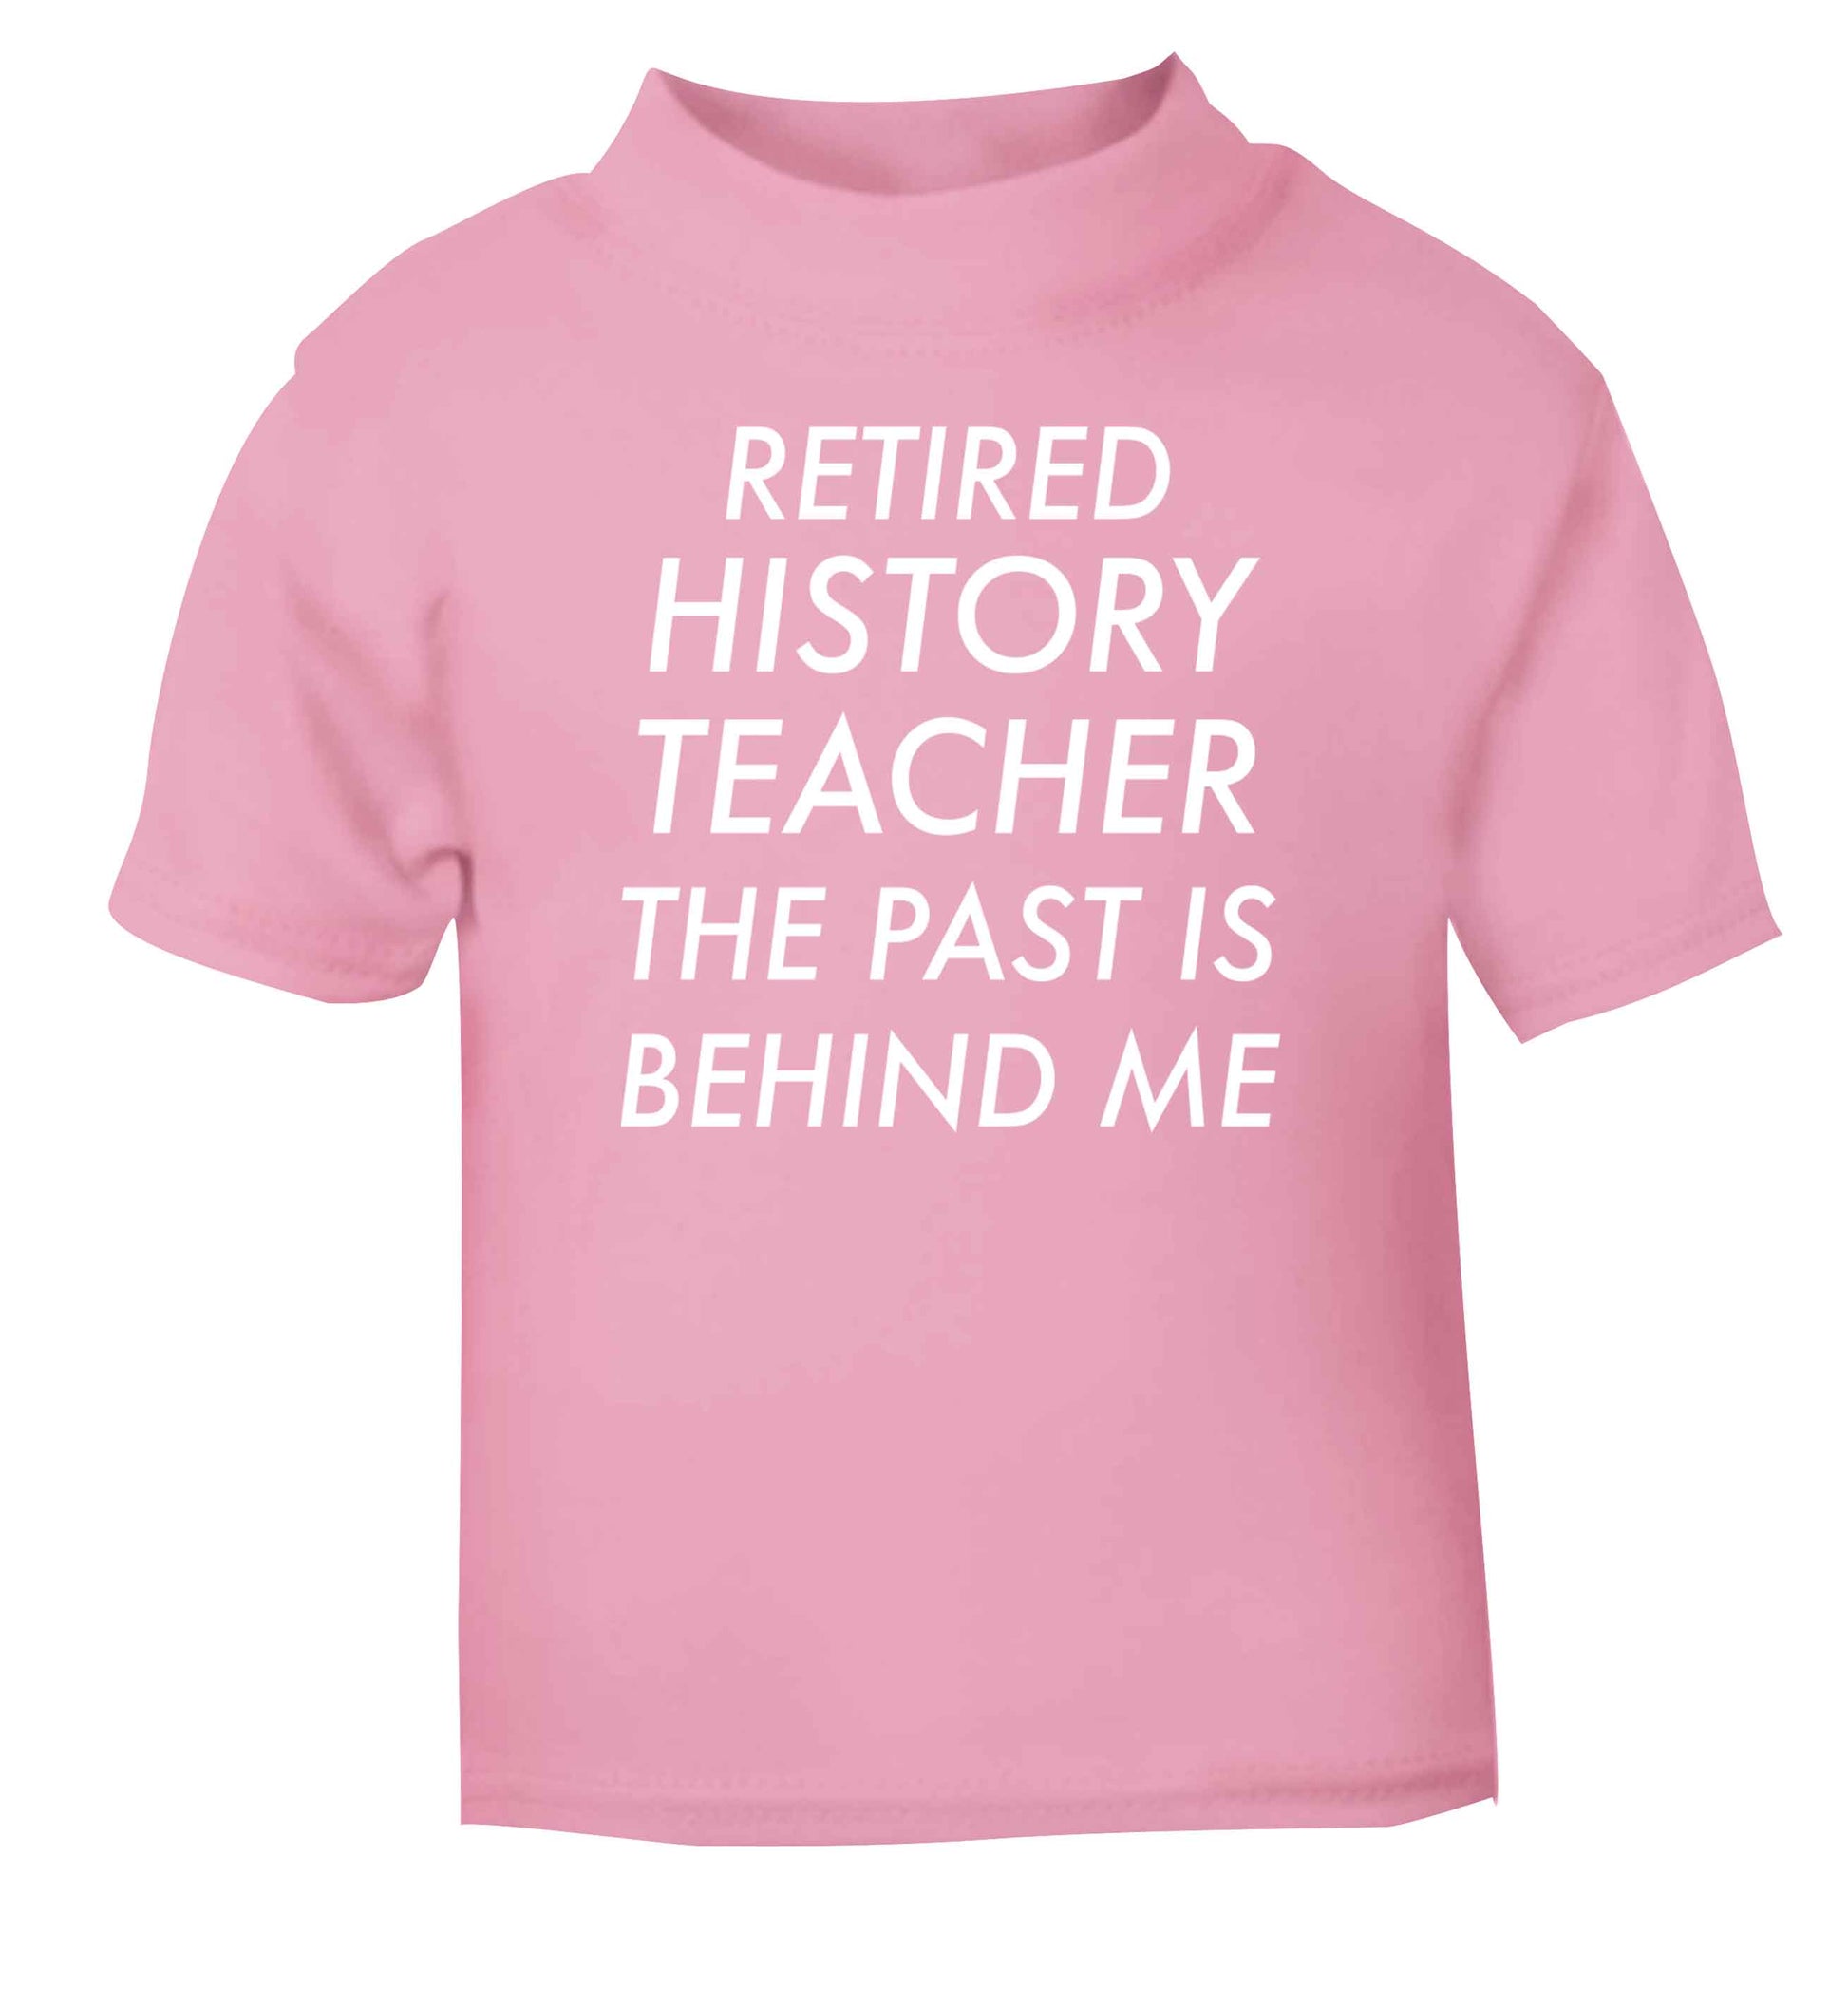 Retired history teacher the past is behind me light pink Baby Toddler Tshirt 2 Years